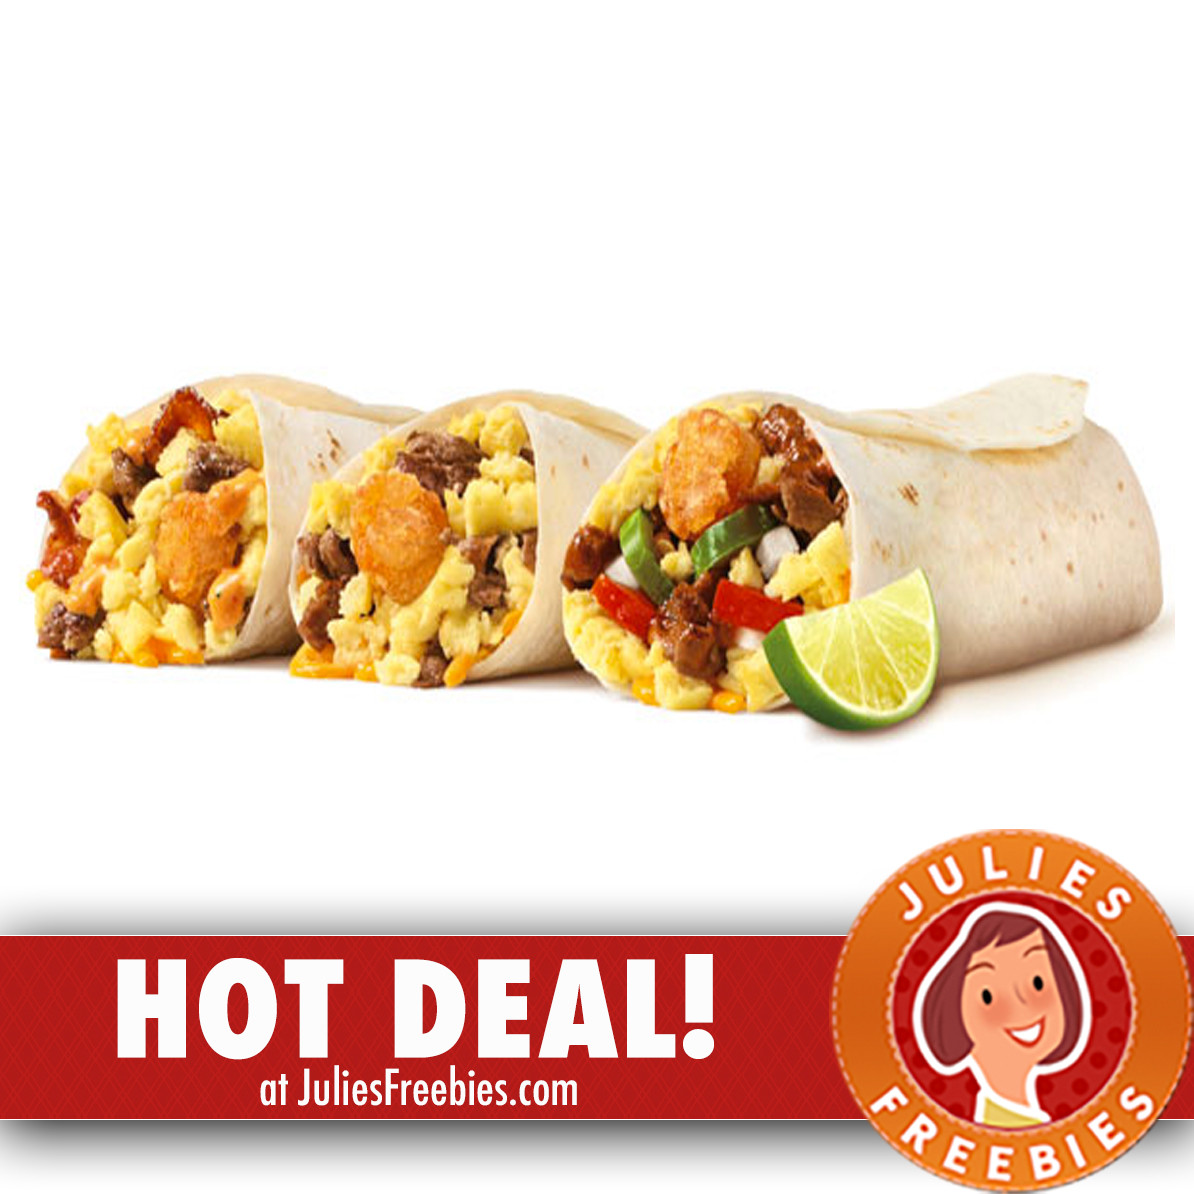 Sonic Breakfast Burritos
 Hot Deal on Sonic Breakfast Burrito s Today ly Julie